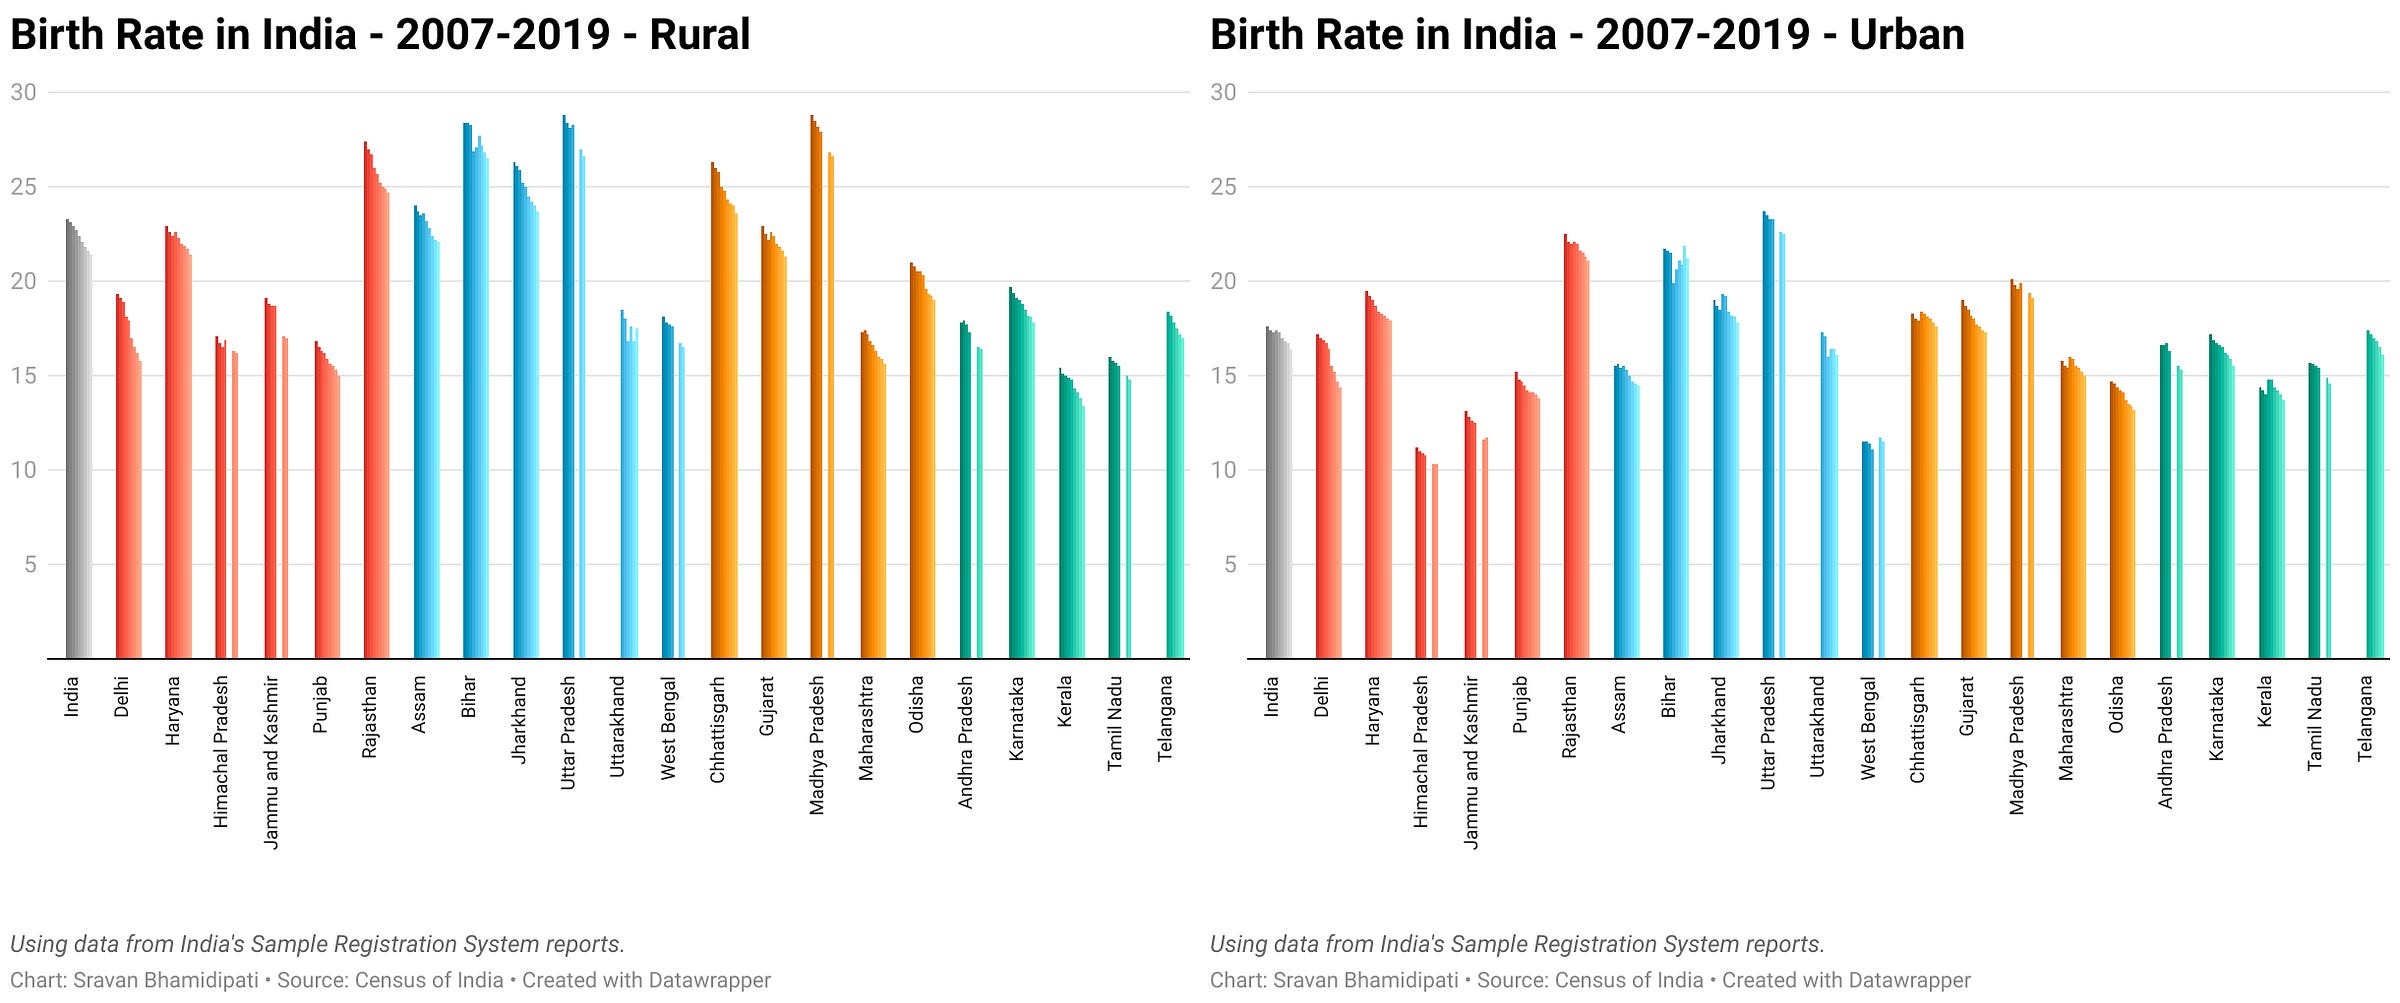 Statewise rural vs urban breakdown of birth rates in India, from 2007 to 2019